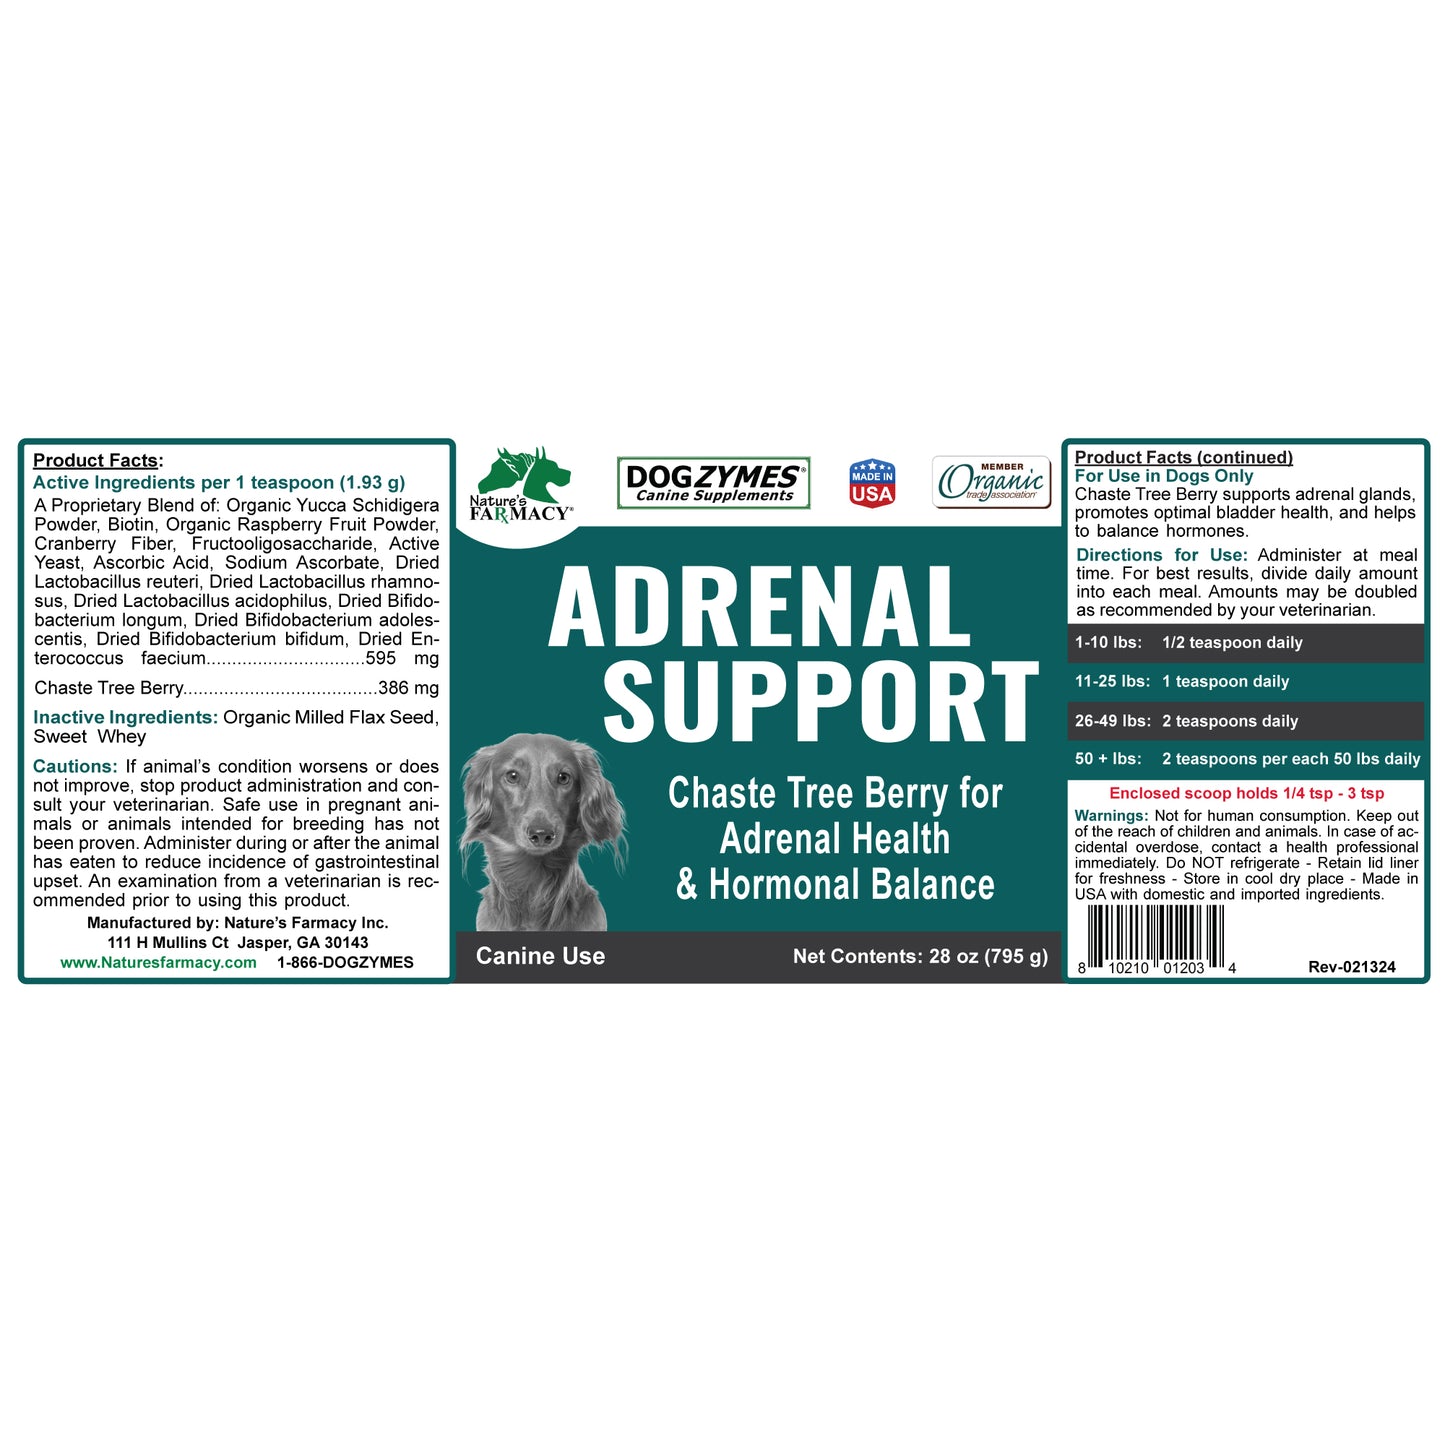 Dogzymes Adrenal Support for Cushing's and Addison's